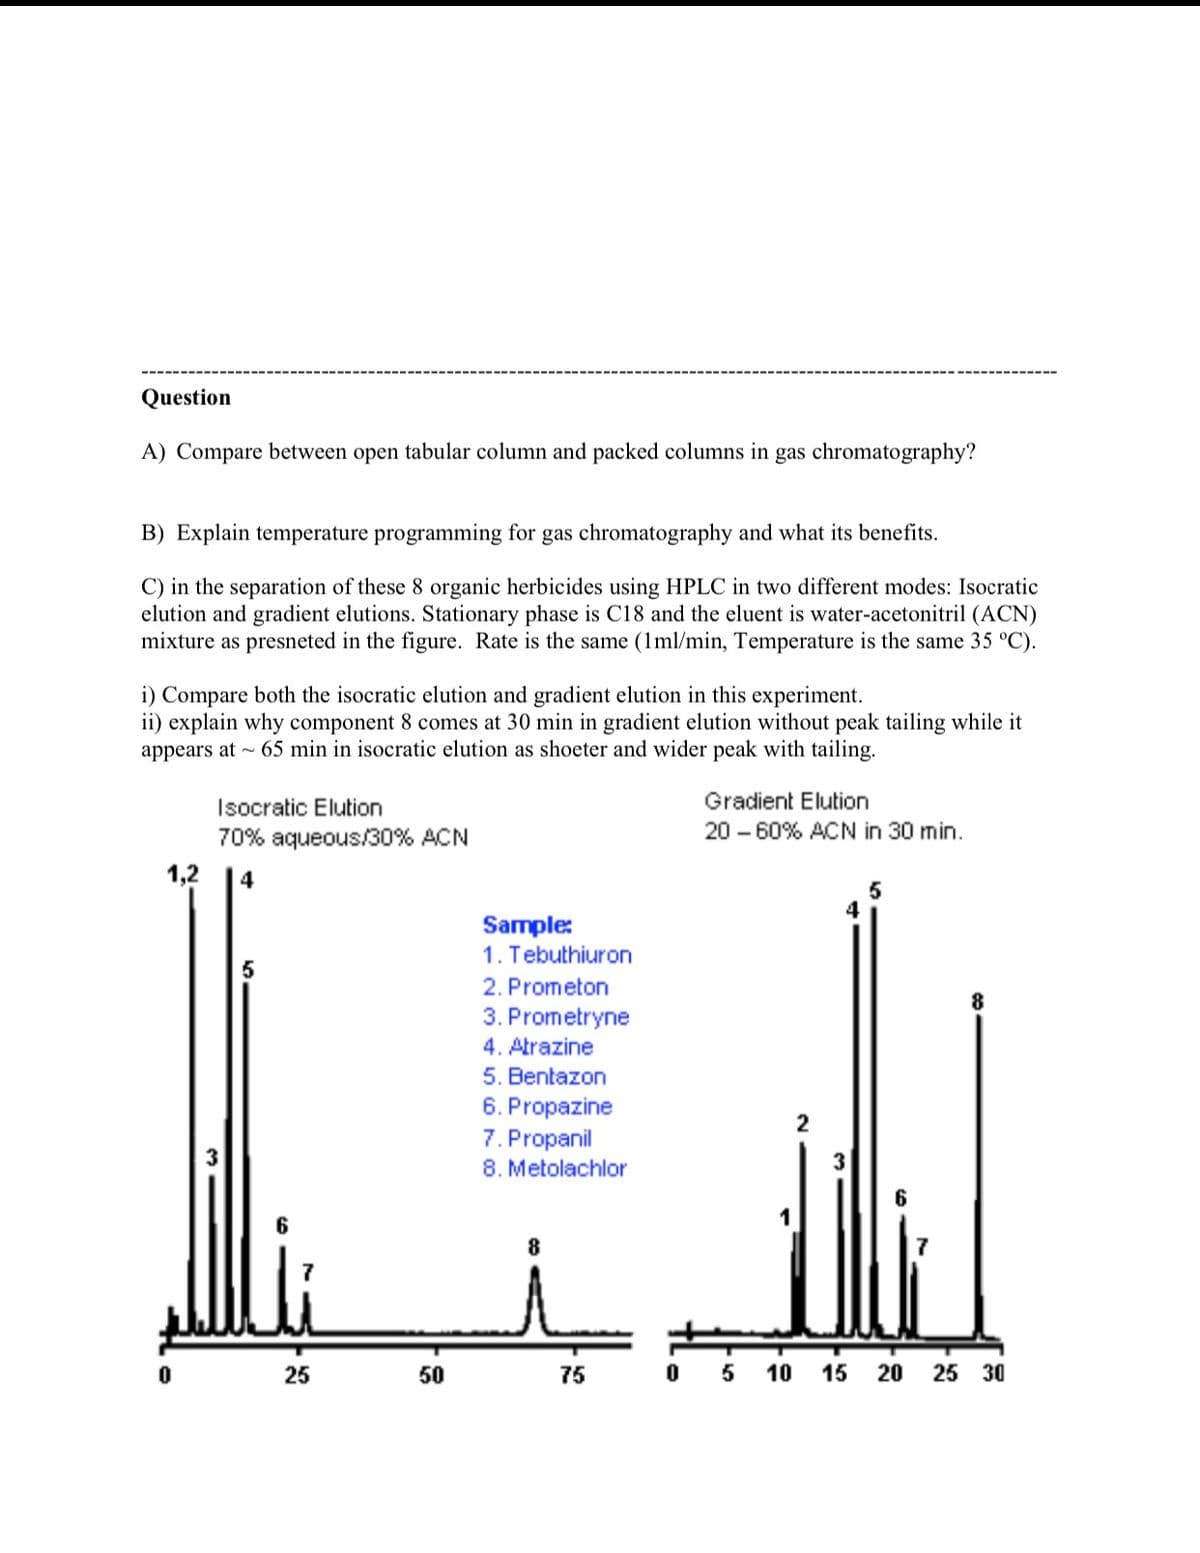 Question
A) Compare between open tabular column and packed columns in gas chromatography?
B) Explain temperature programming for gas chromatography and what its benefits.
C) in the separation of these 8 organic herbicides using HPLC in two different modes: Isocratic
elution and gradient elutions. Stationary phase is C18 and the eluent is water-acetonitril (ACN)
mixture as presneted in the figure. Rate is the same (1ml/min, Temperature is the same 35 °C).
i) Compare both the isocratic elution and gradient elution in this experiment.
ii) explain why component 8 comes at 30 min in gradient elution without peak tailing while it
appears at - 65 min in isocratic elution as shoeter and wider peak with tailing.
Isocratic Elution
Gradient Elution
70% aqueous/30% ACN
20 - 60% ACN in 30 min.
1,2
4
5
4
Sample:
1. Tebuthiuron
2. Prometon
3. Prometryne
4. Atrazine
5. Bentazon
6. Propazine
7. Propanil
8. Metolachlor
2
3
6.
7
25
50
75
0 5 10 15 20 25 30
